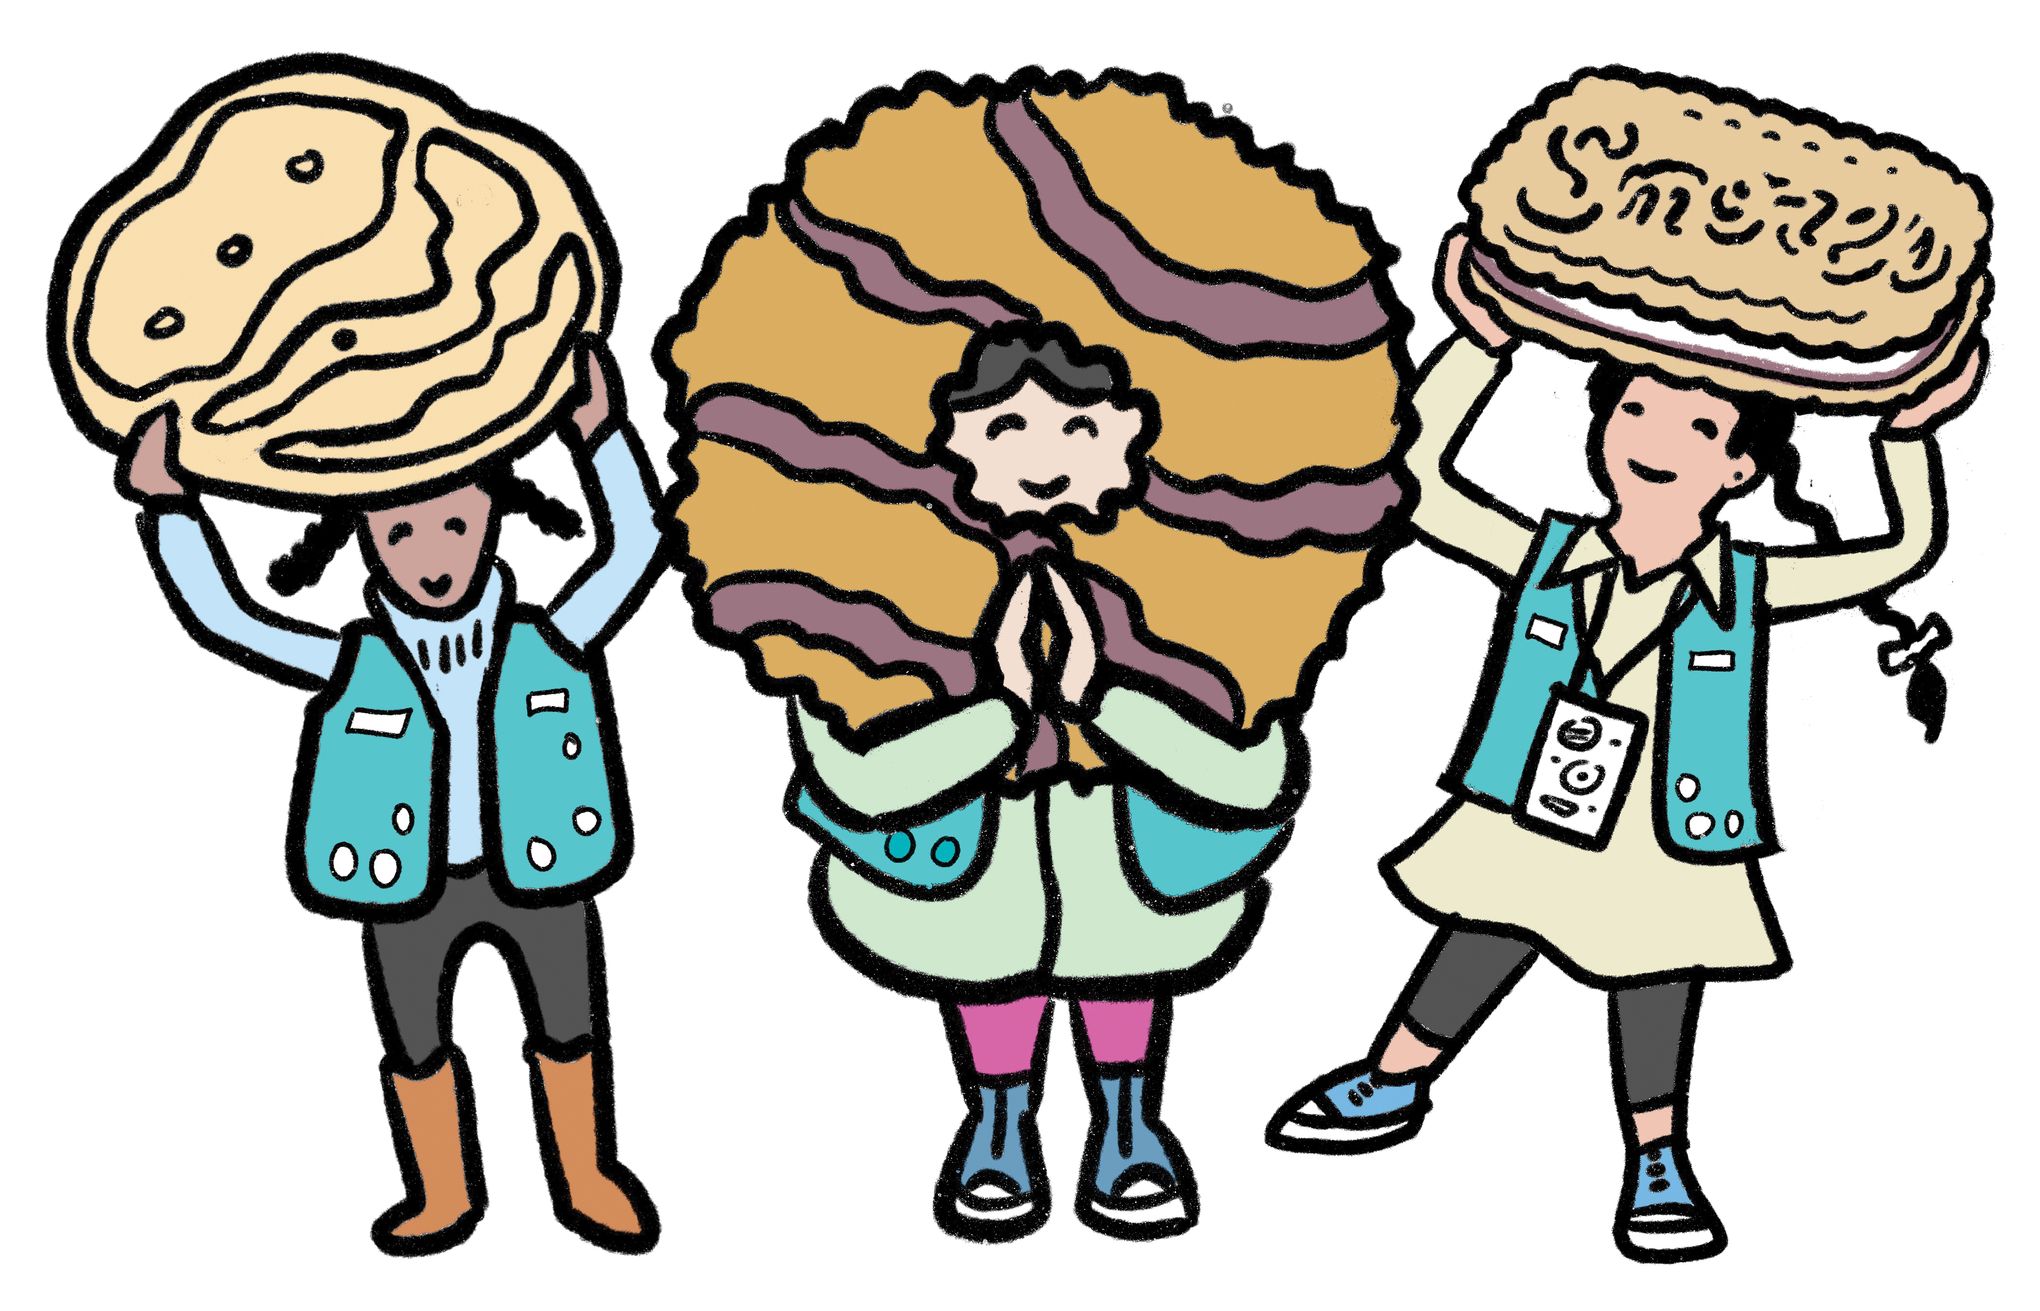 girl scout cookies 2022 clipart